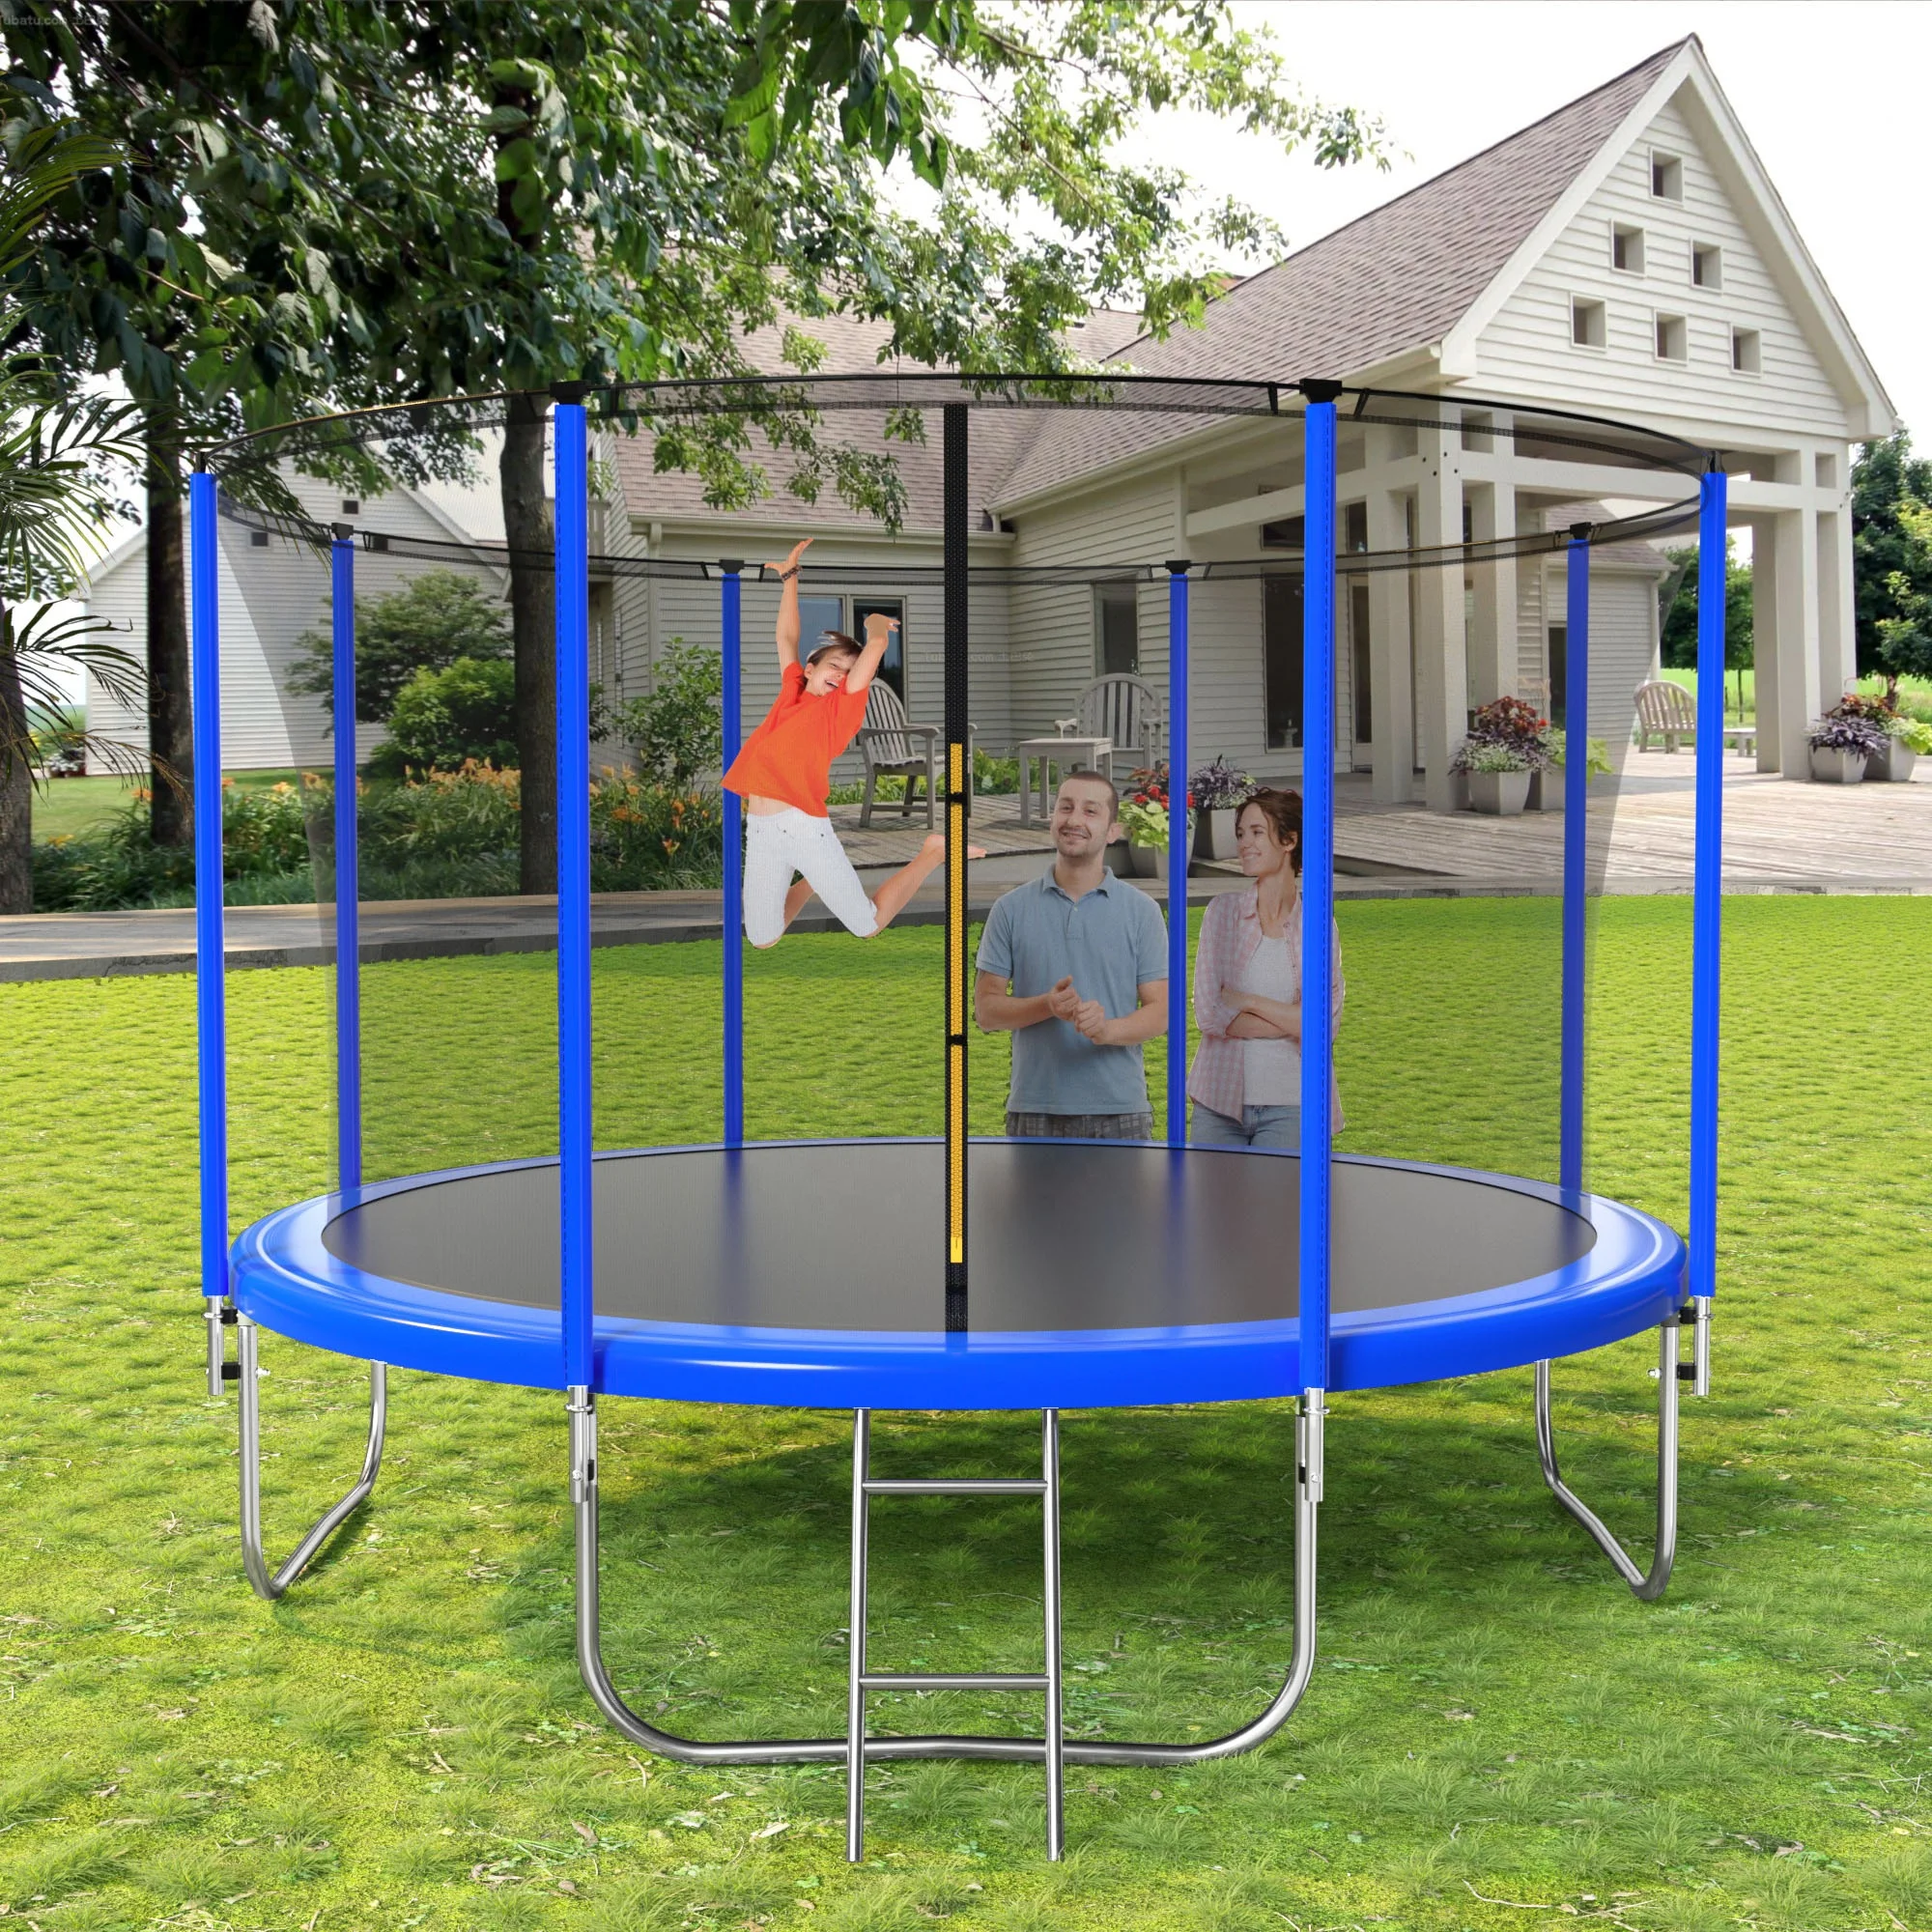 

Kids single bungee jumping outdoor trampoline manufacturers wholesale sales cheap big kid jumping trampoline with enclosures, Black & blue